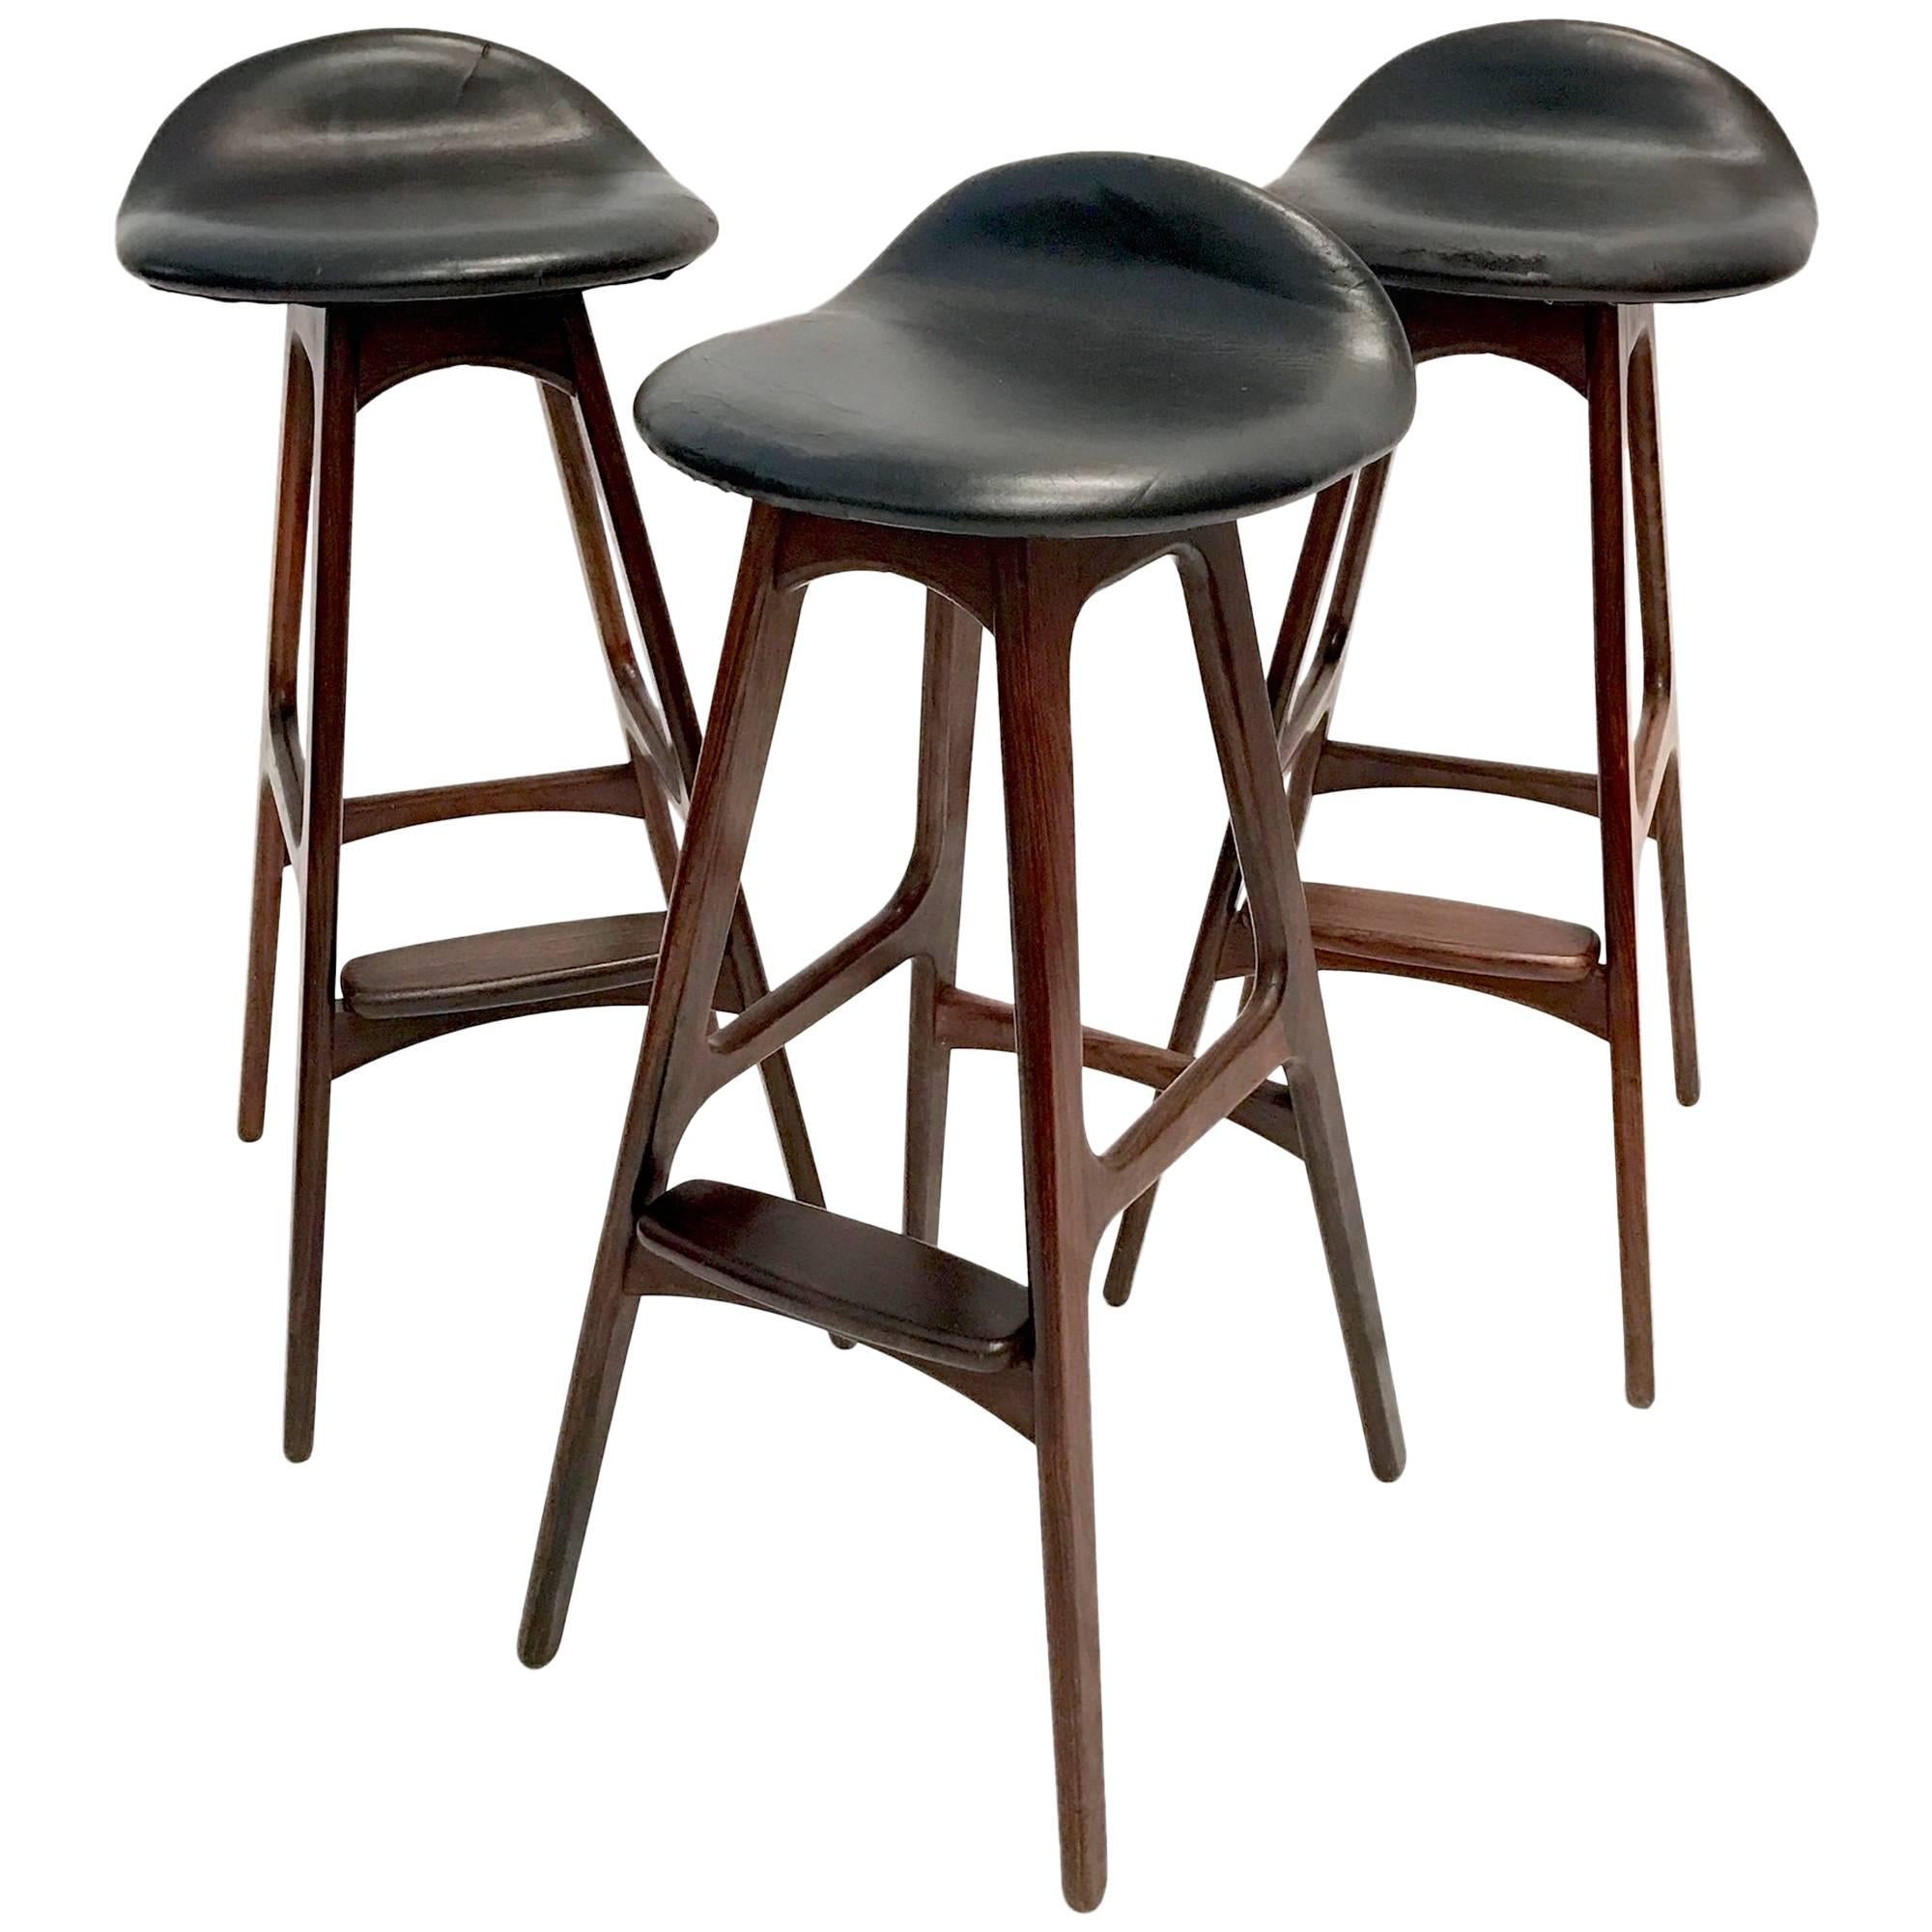 Set of Three Vintage Danish Barstools by Erik Buch in Rosewood and Black Leather